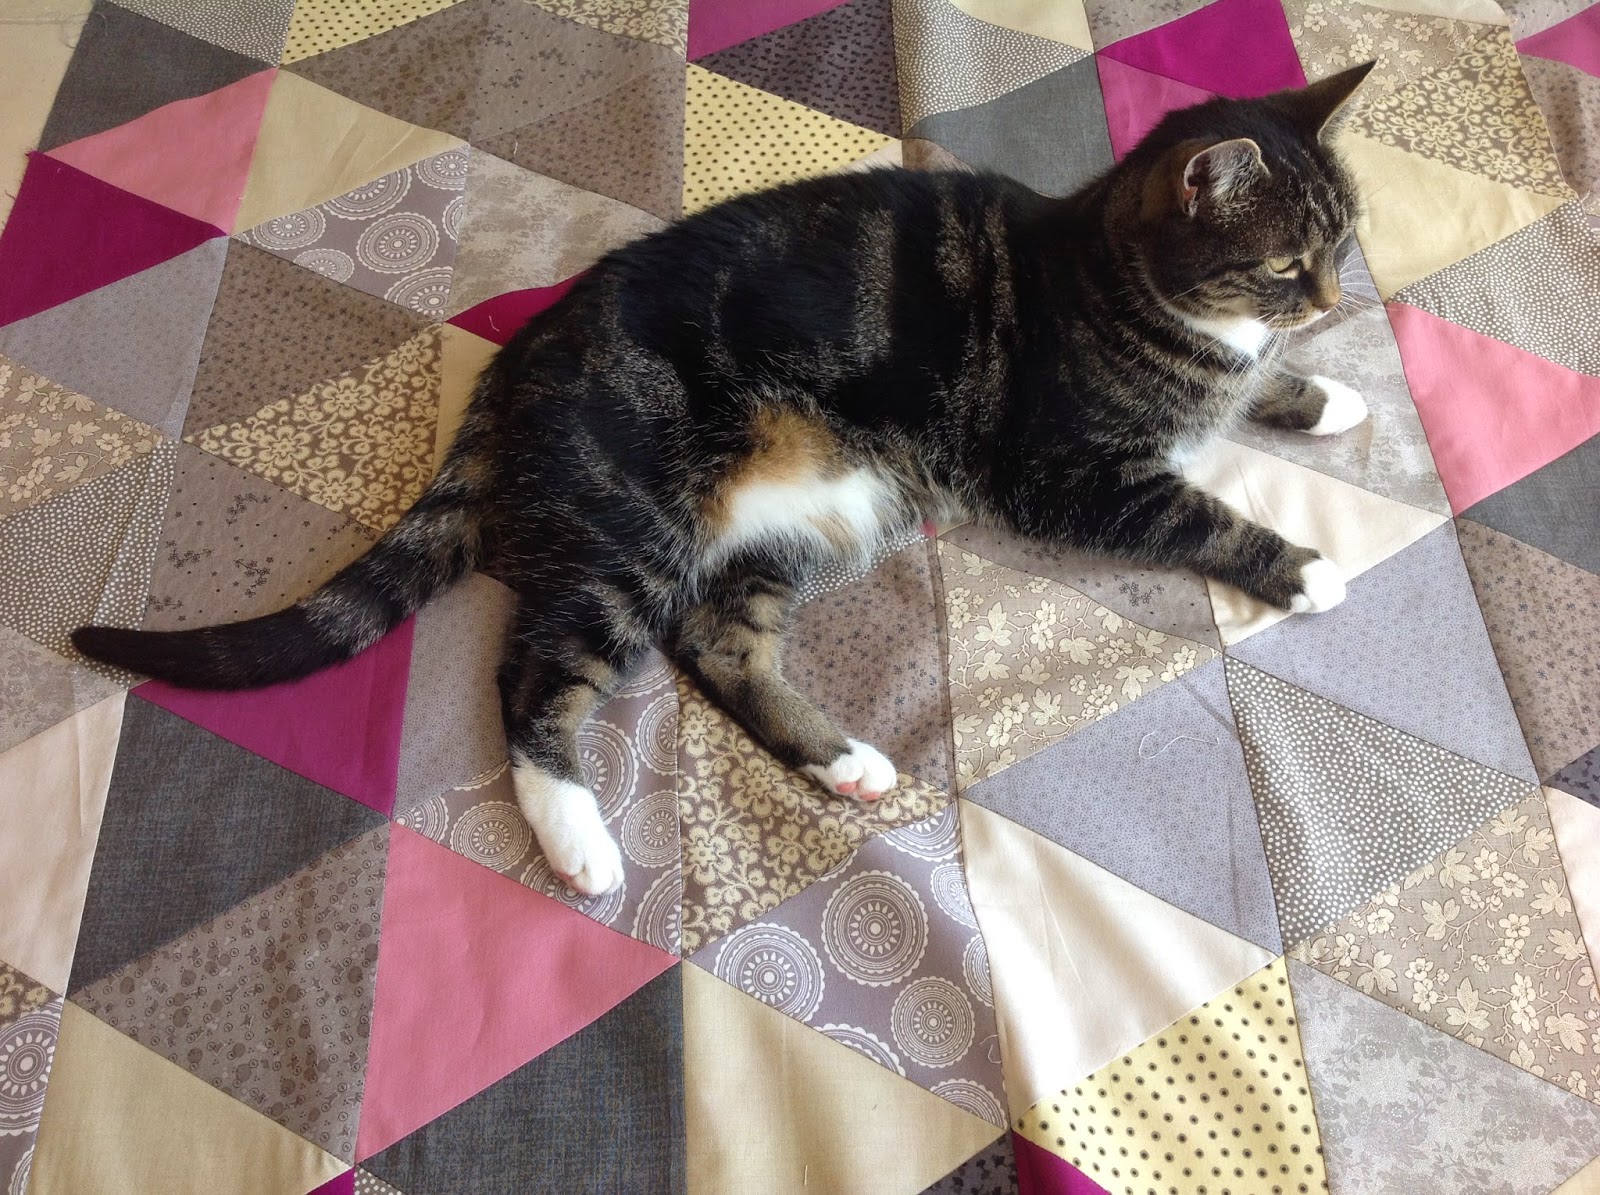 Equilateral Triangle Quilt with Suzi the cat